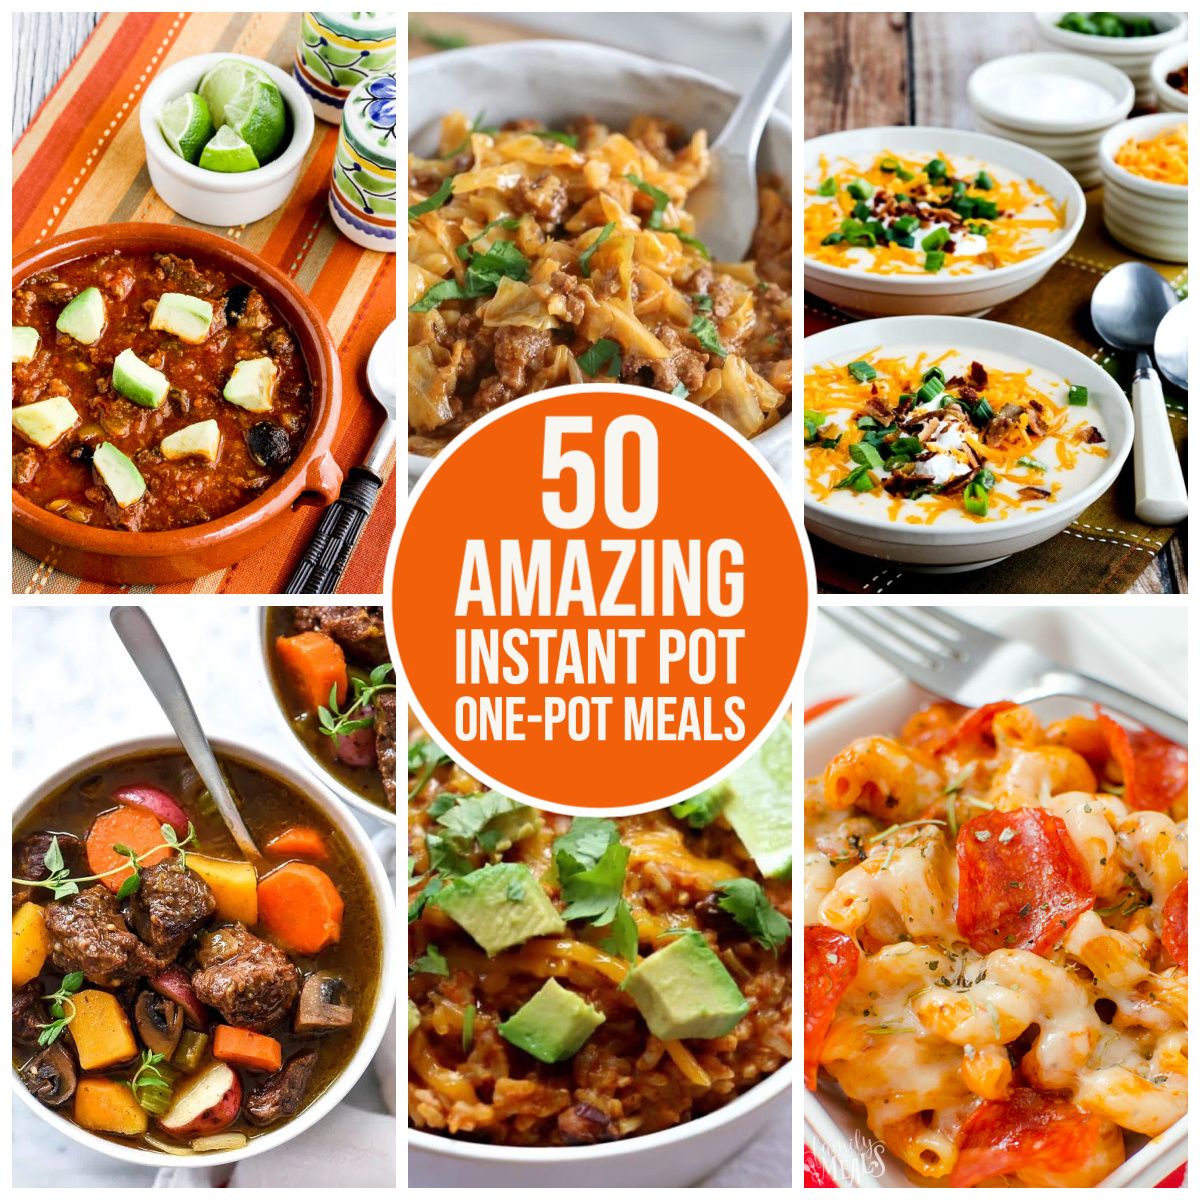 50 Amazing Instant Pot One-Pot Meals collage with text overlay